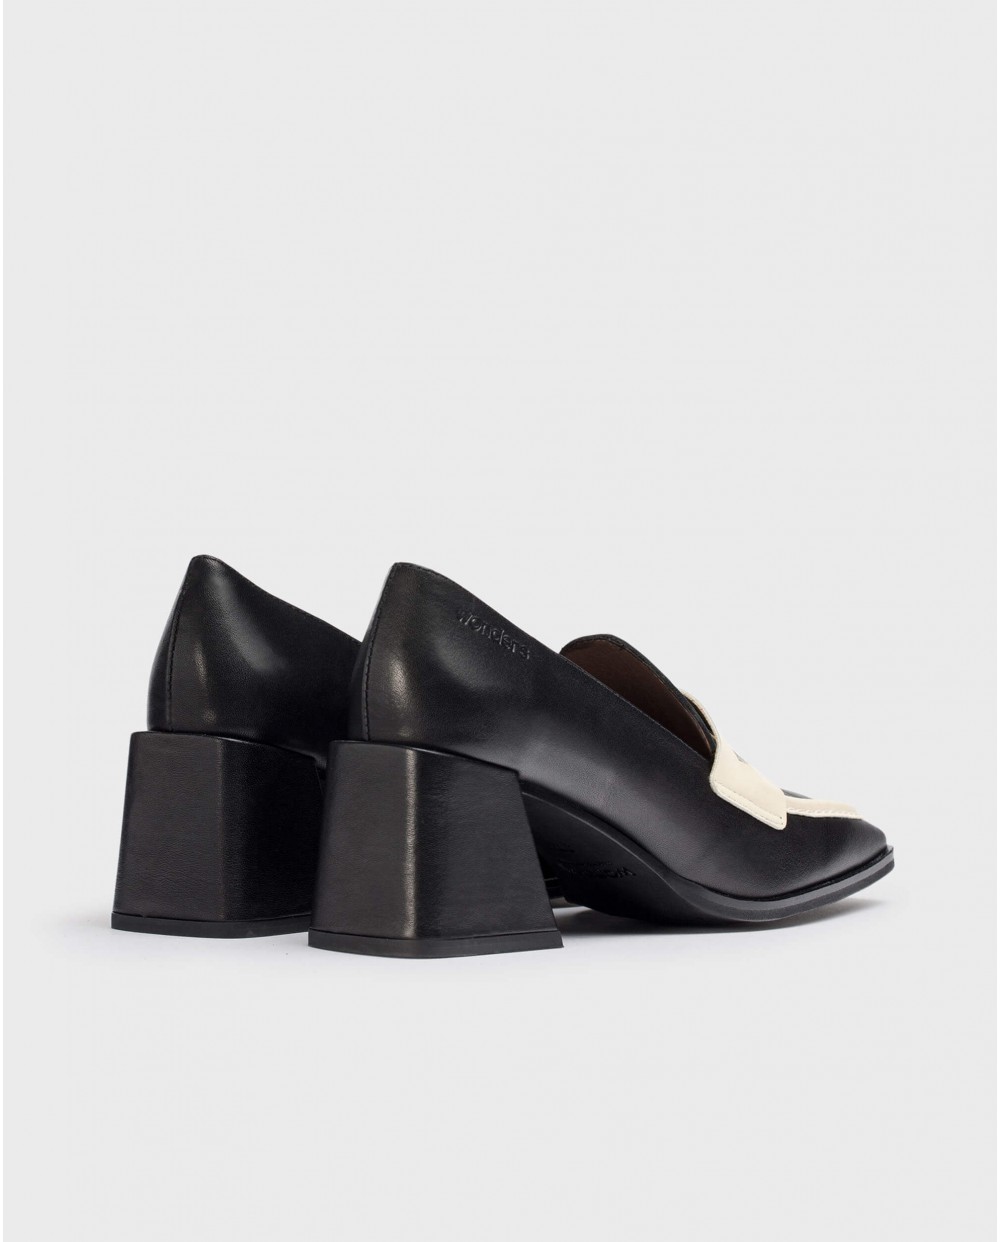 Wonders-Loafers and ballerines-Black FIODOR moccasin